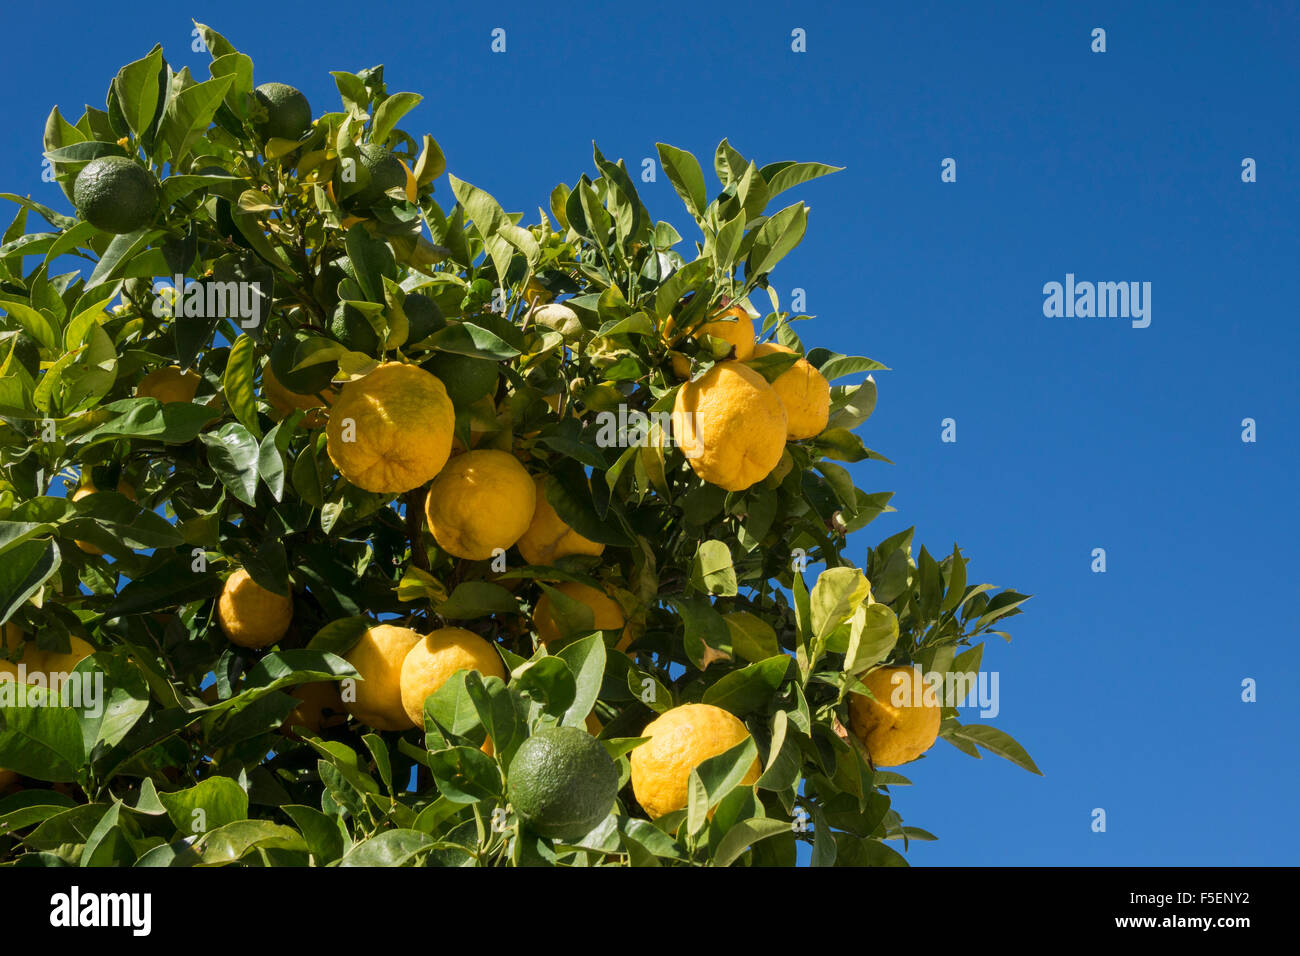 Hybrid fruit tree growing both oranges and lemons on the same branch Stock Photo